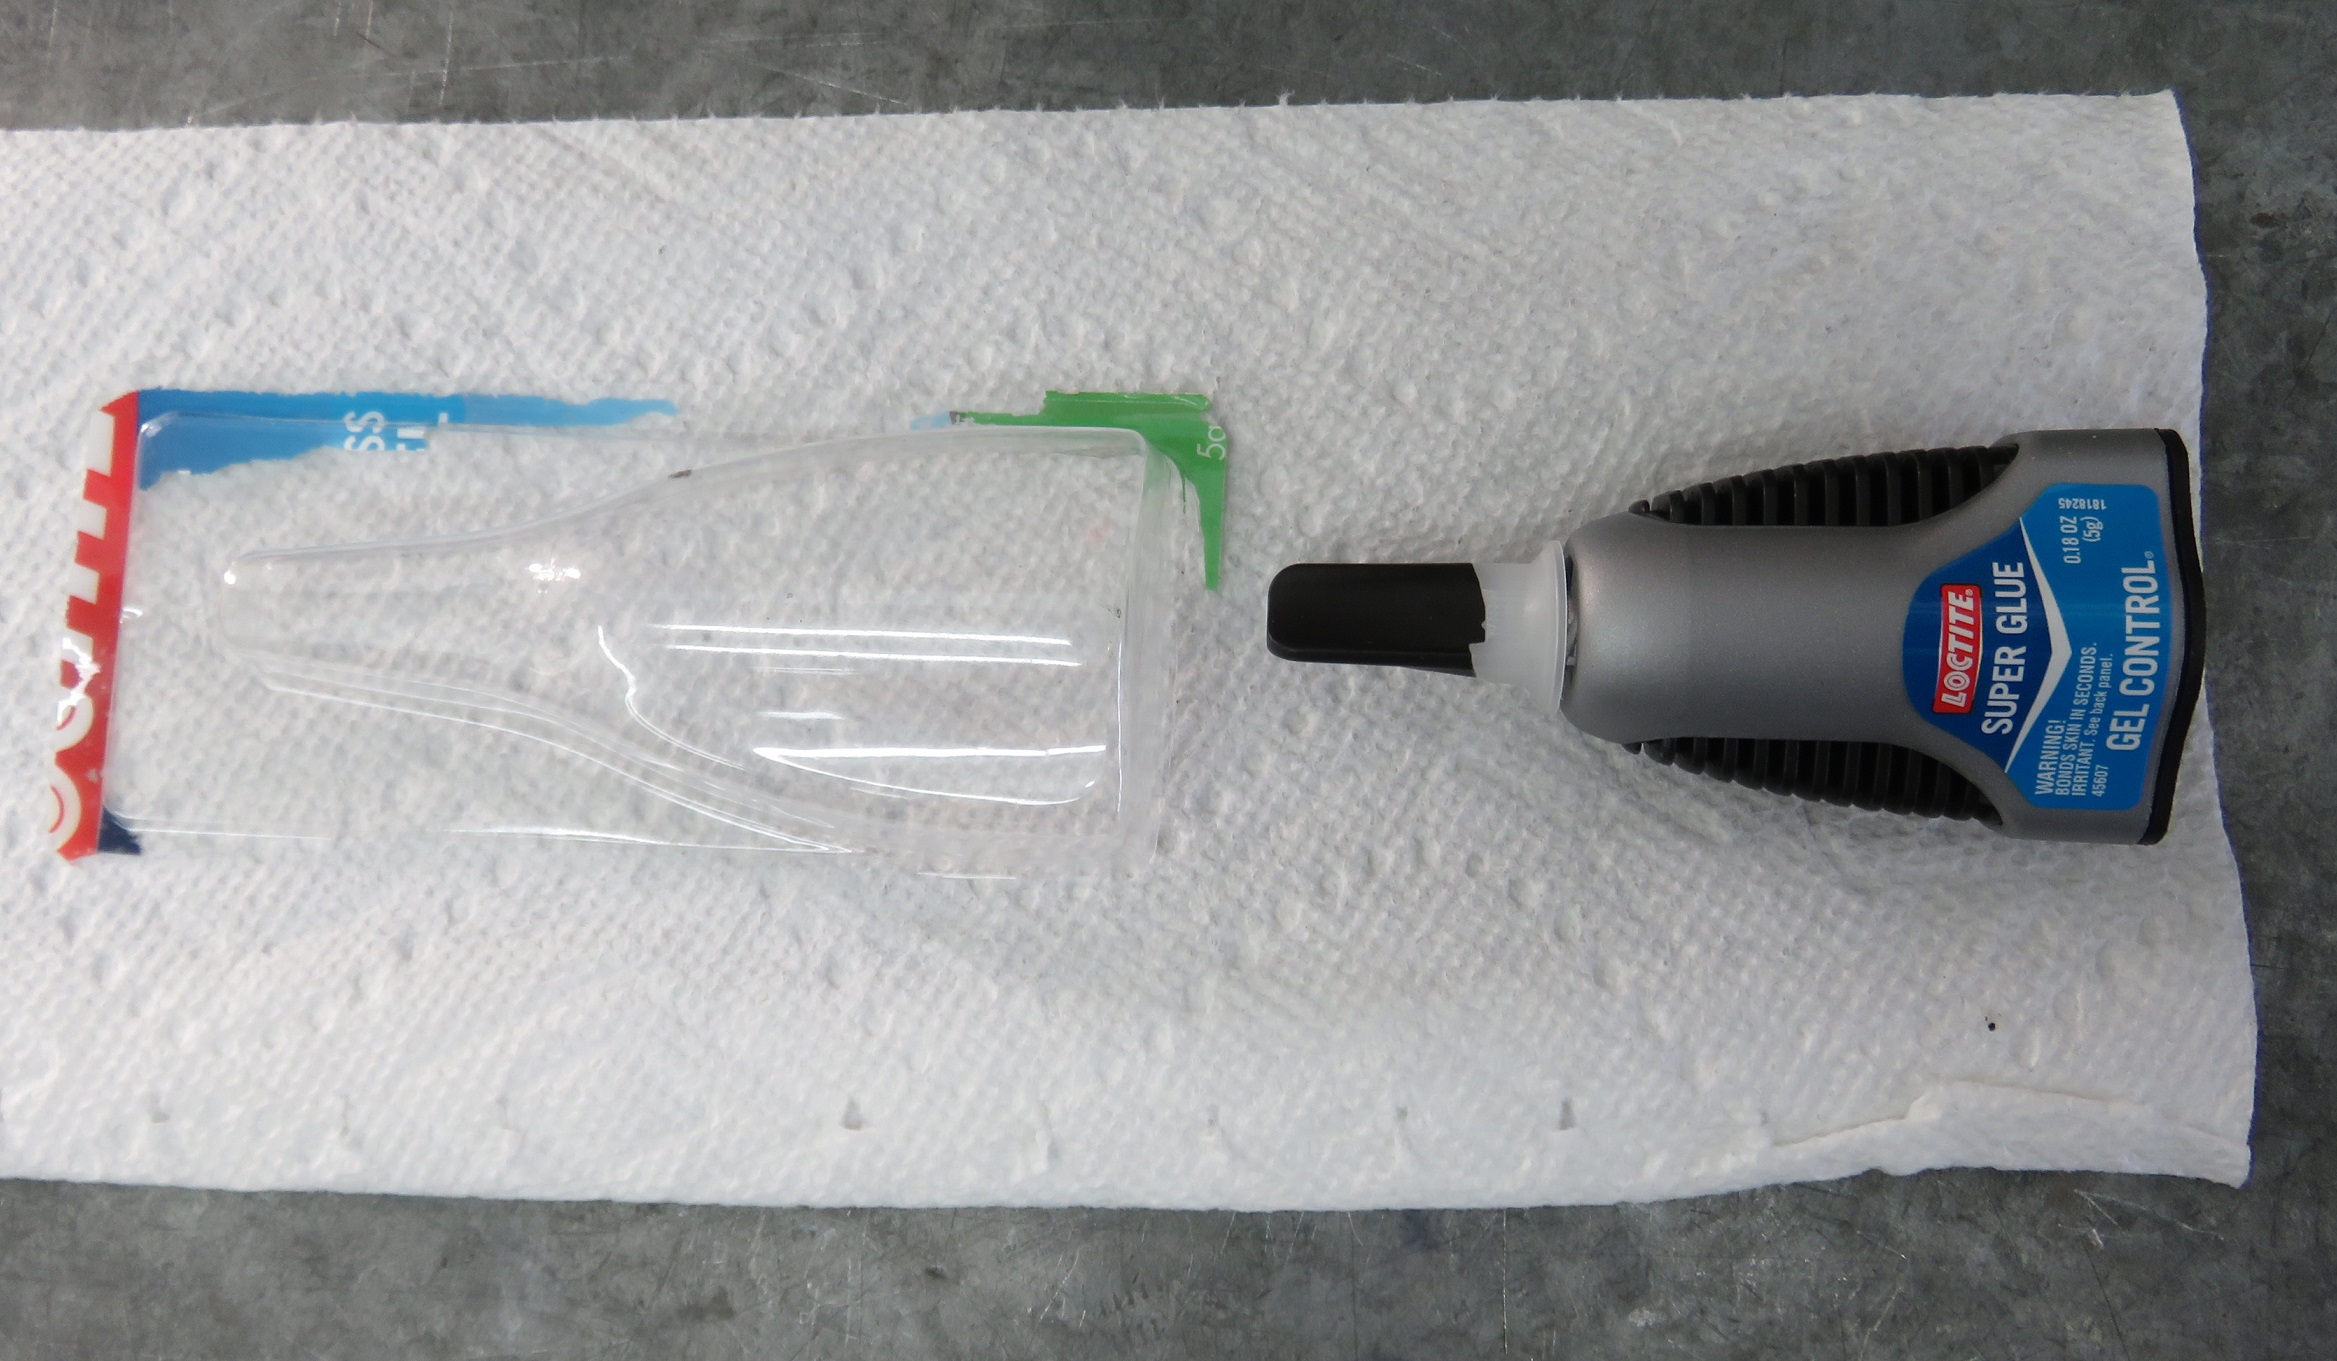 A fix uses a thin cut of plastic packing from a super-glue package. It's flexible and strong.